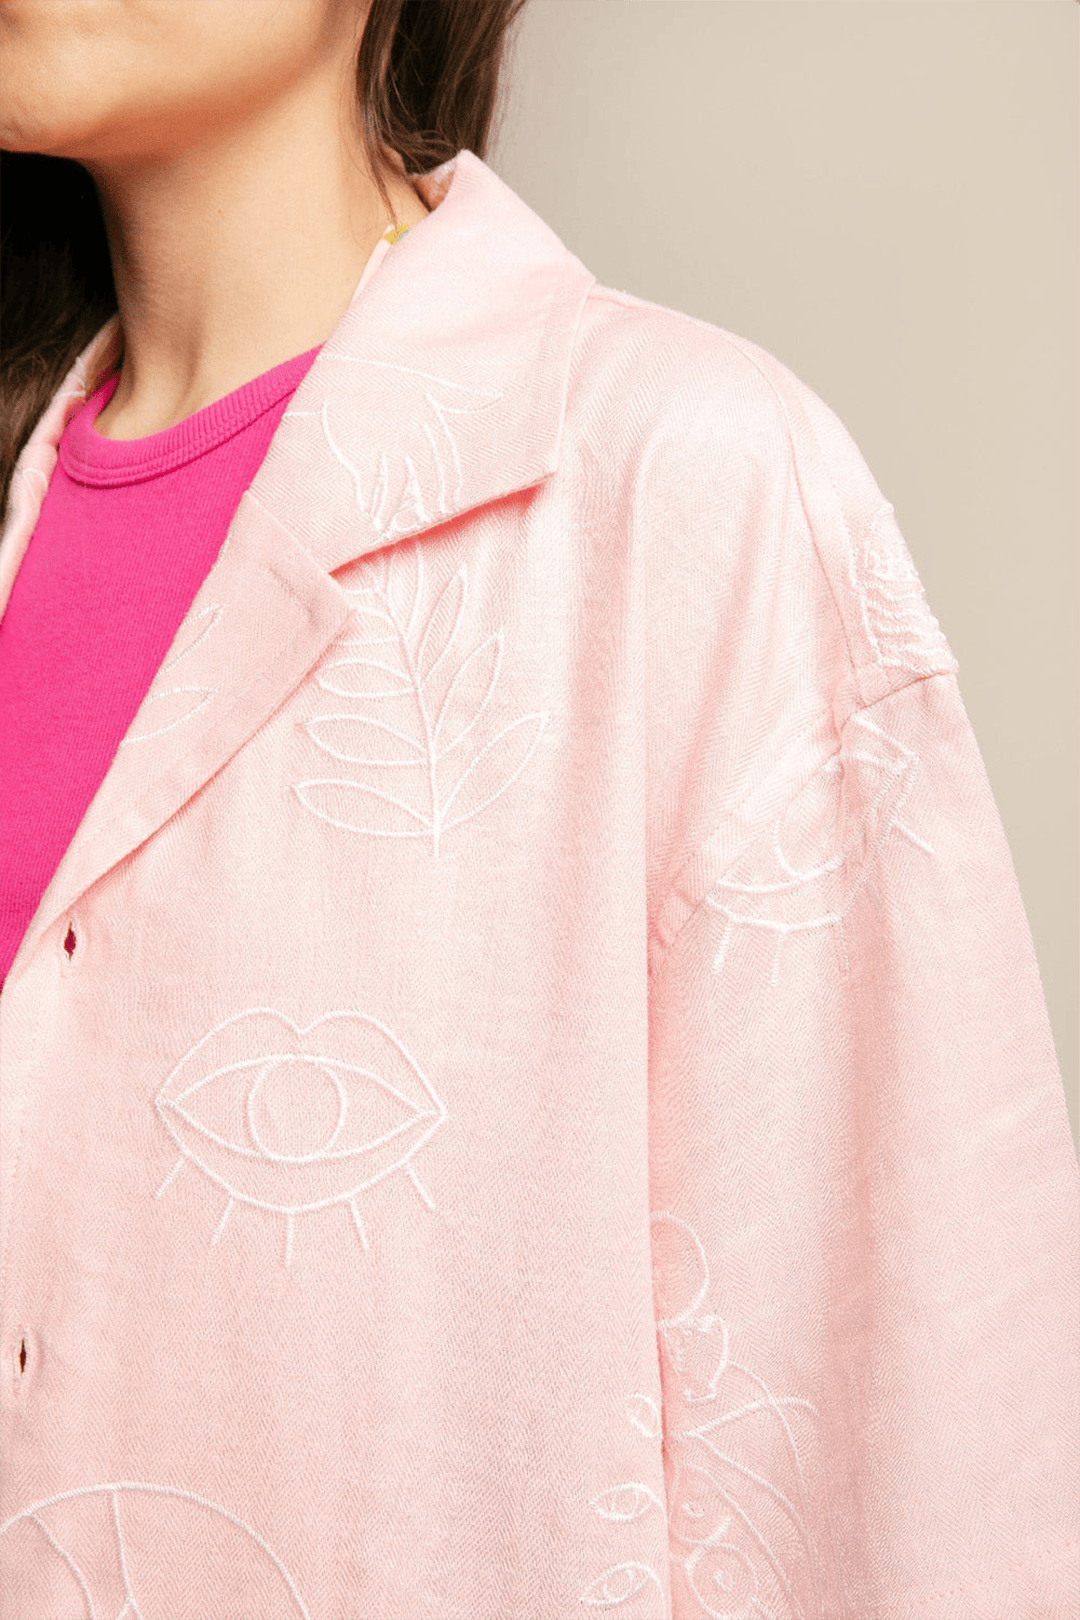 CABRIOLES・Embroidered shirt・Pink